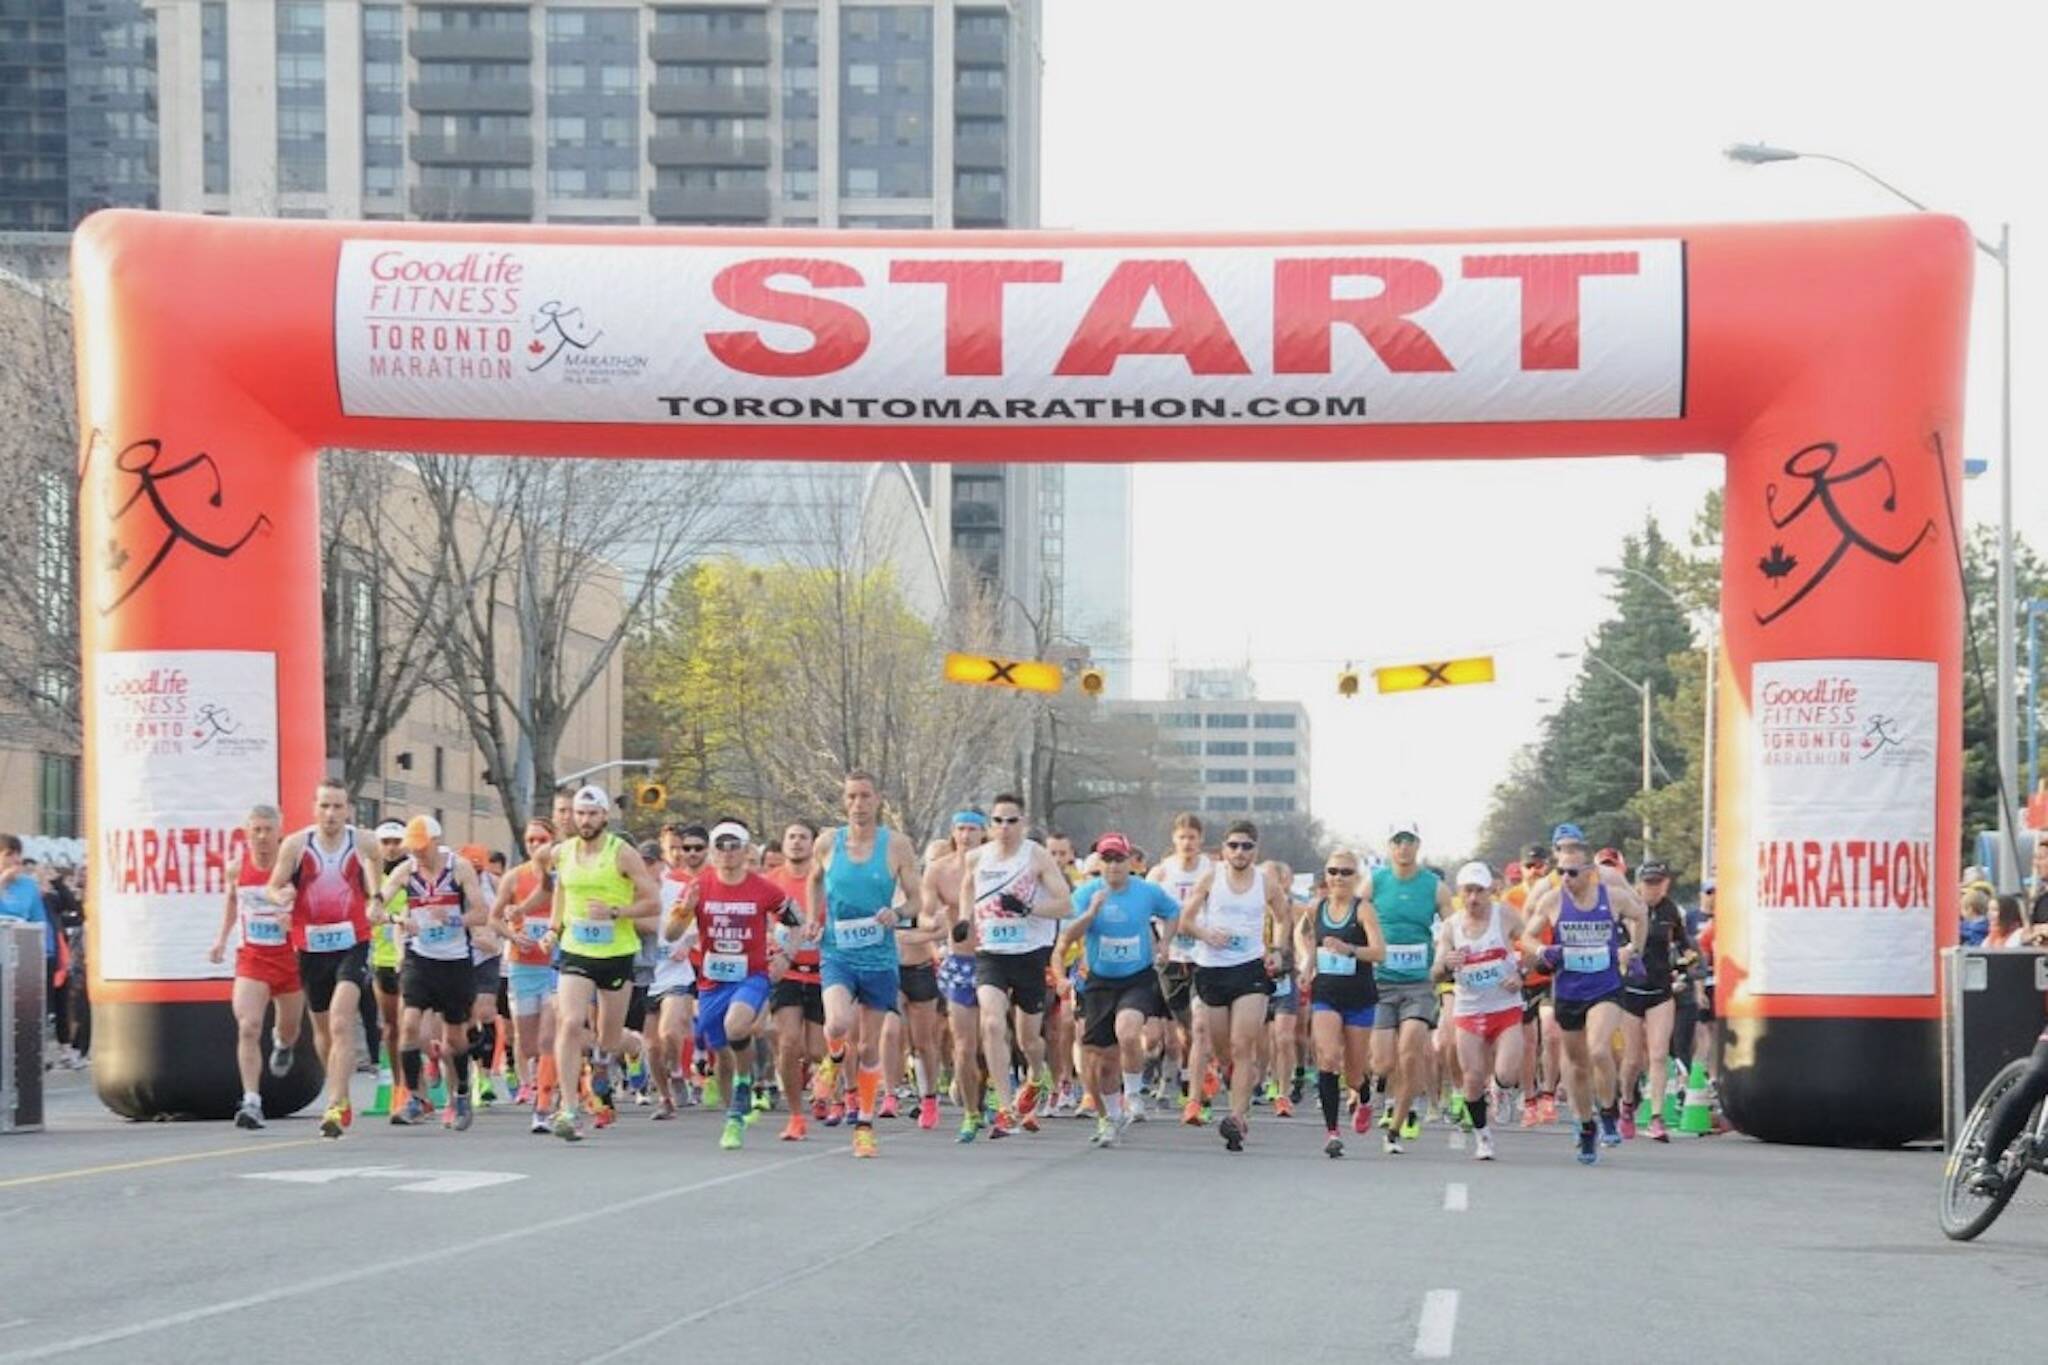 People are slamming the Toronto Marathon for being this year